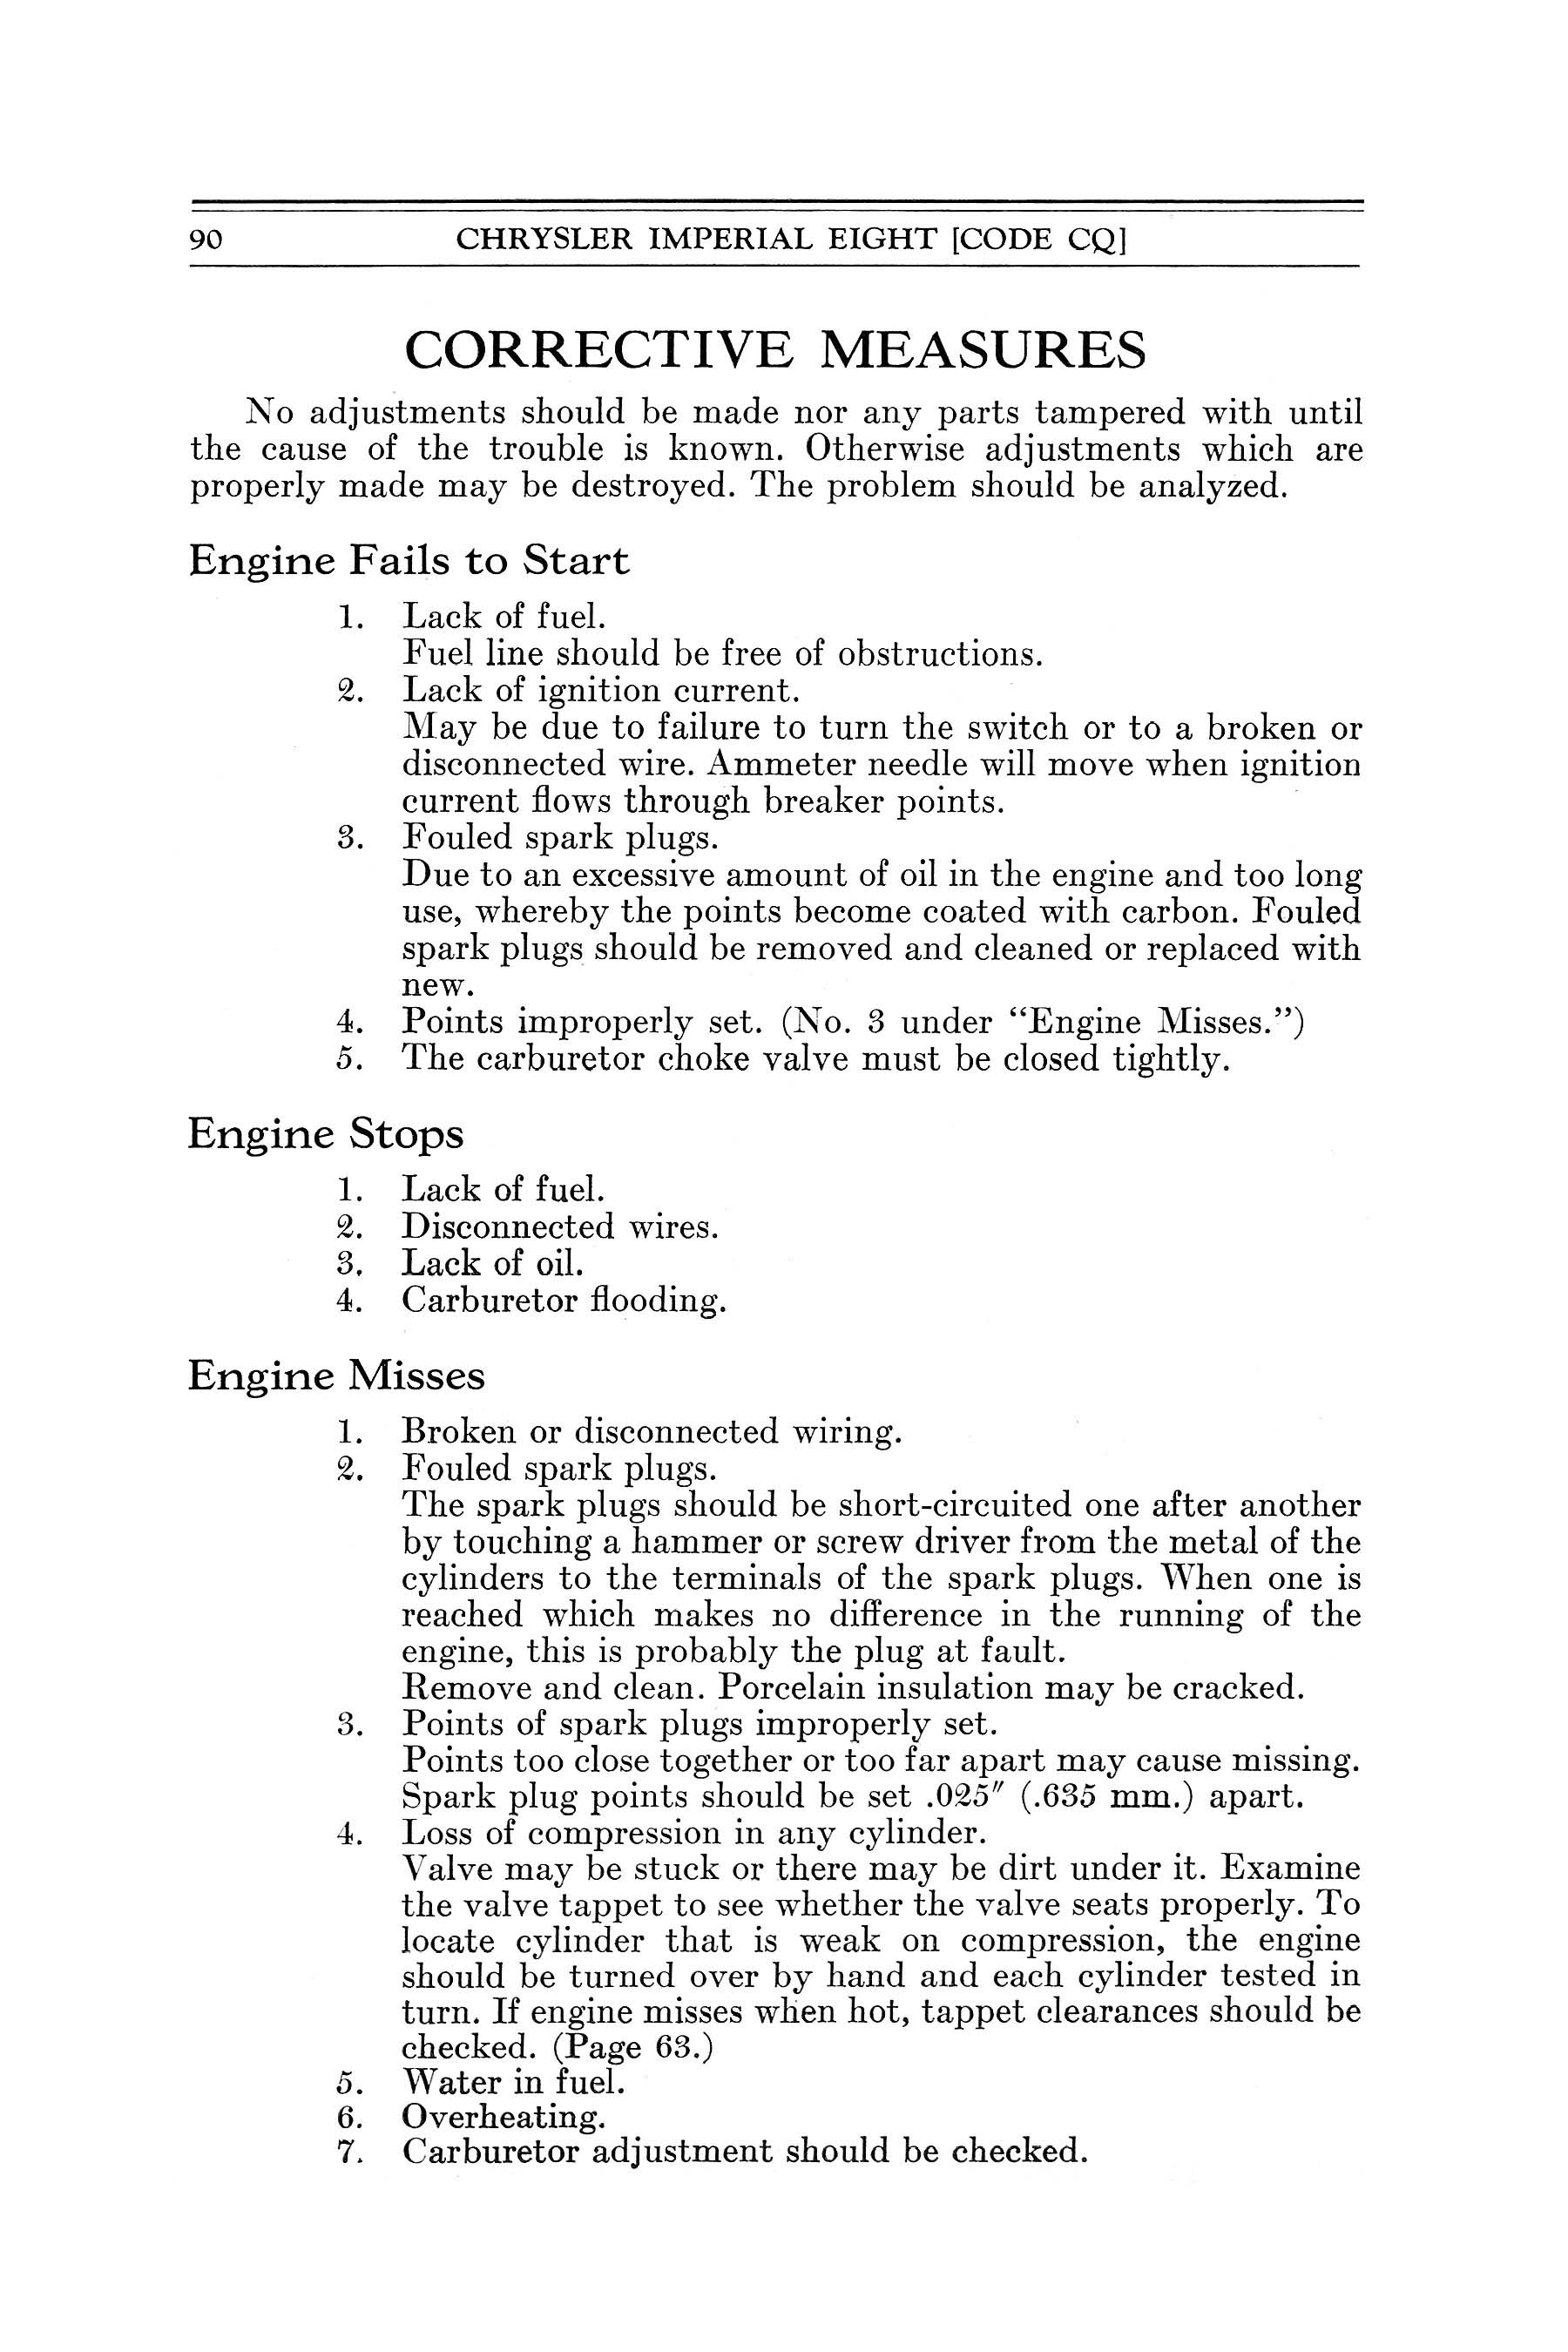 1933 Imperial Instruction Book-090